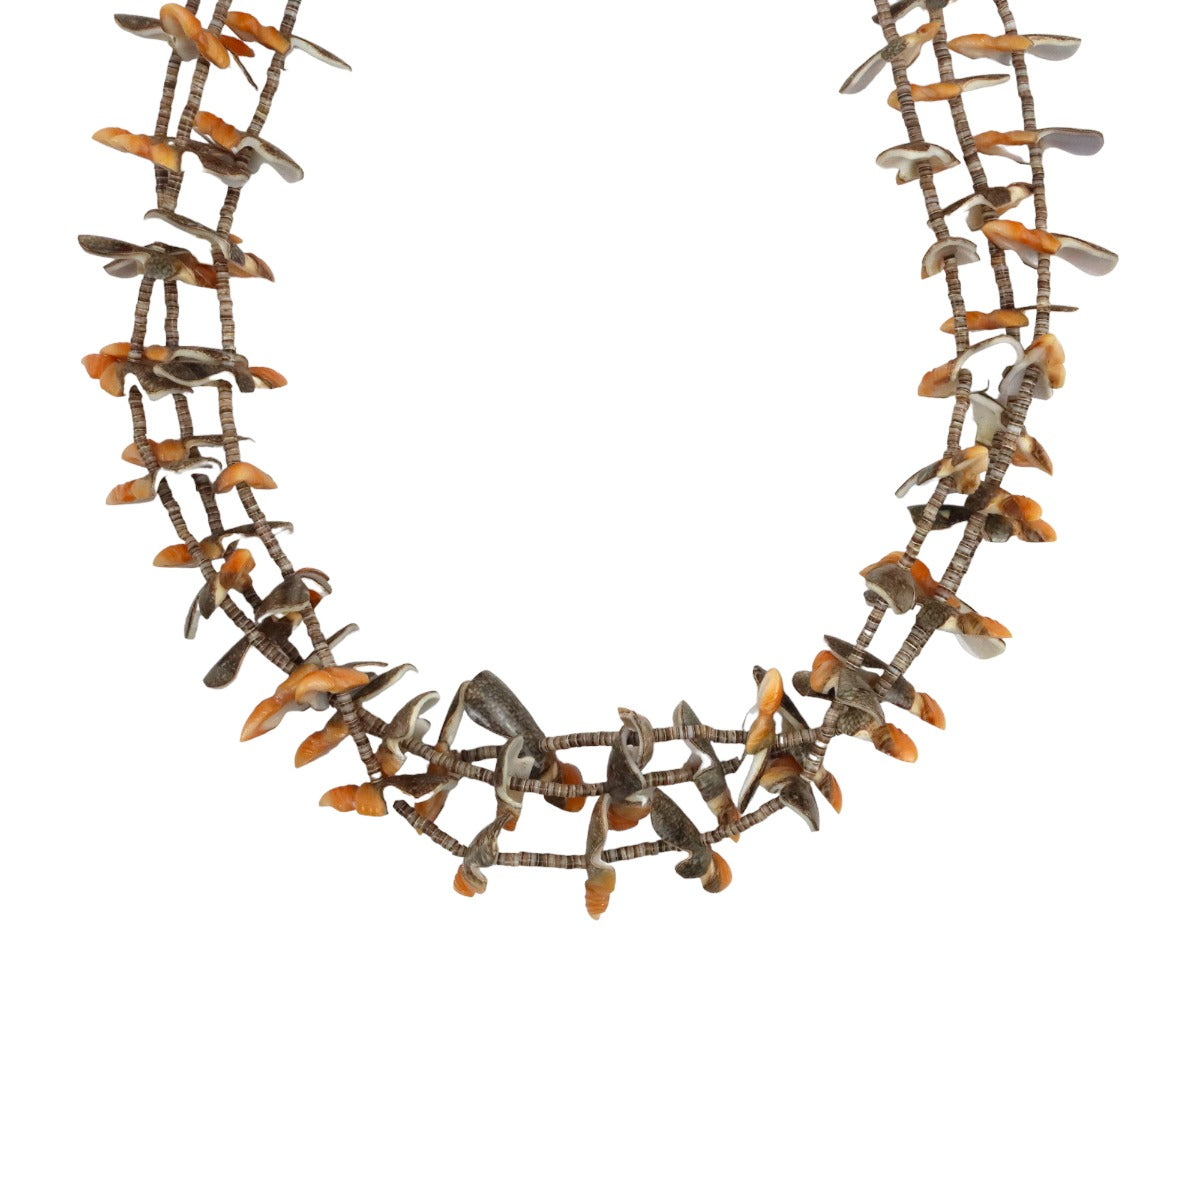 Santo Domingo (Kewa) or Zuni 3-Strand Spiny Oyster Fetish and Pinshell Heishi Necklace c. 1970s, 29" length (J15076-CO-024) 1